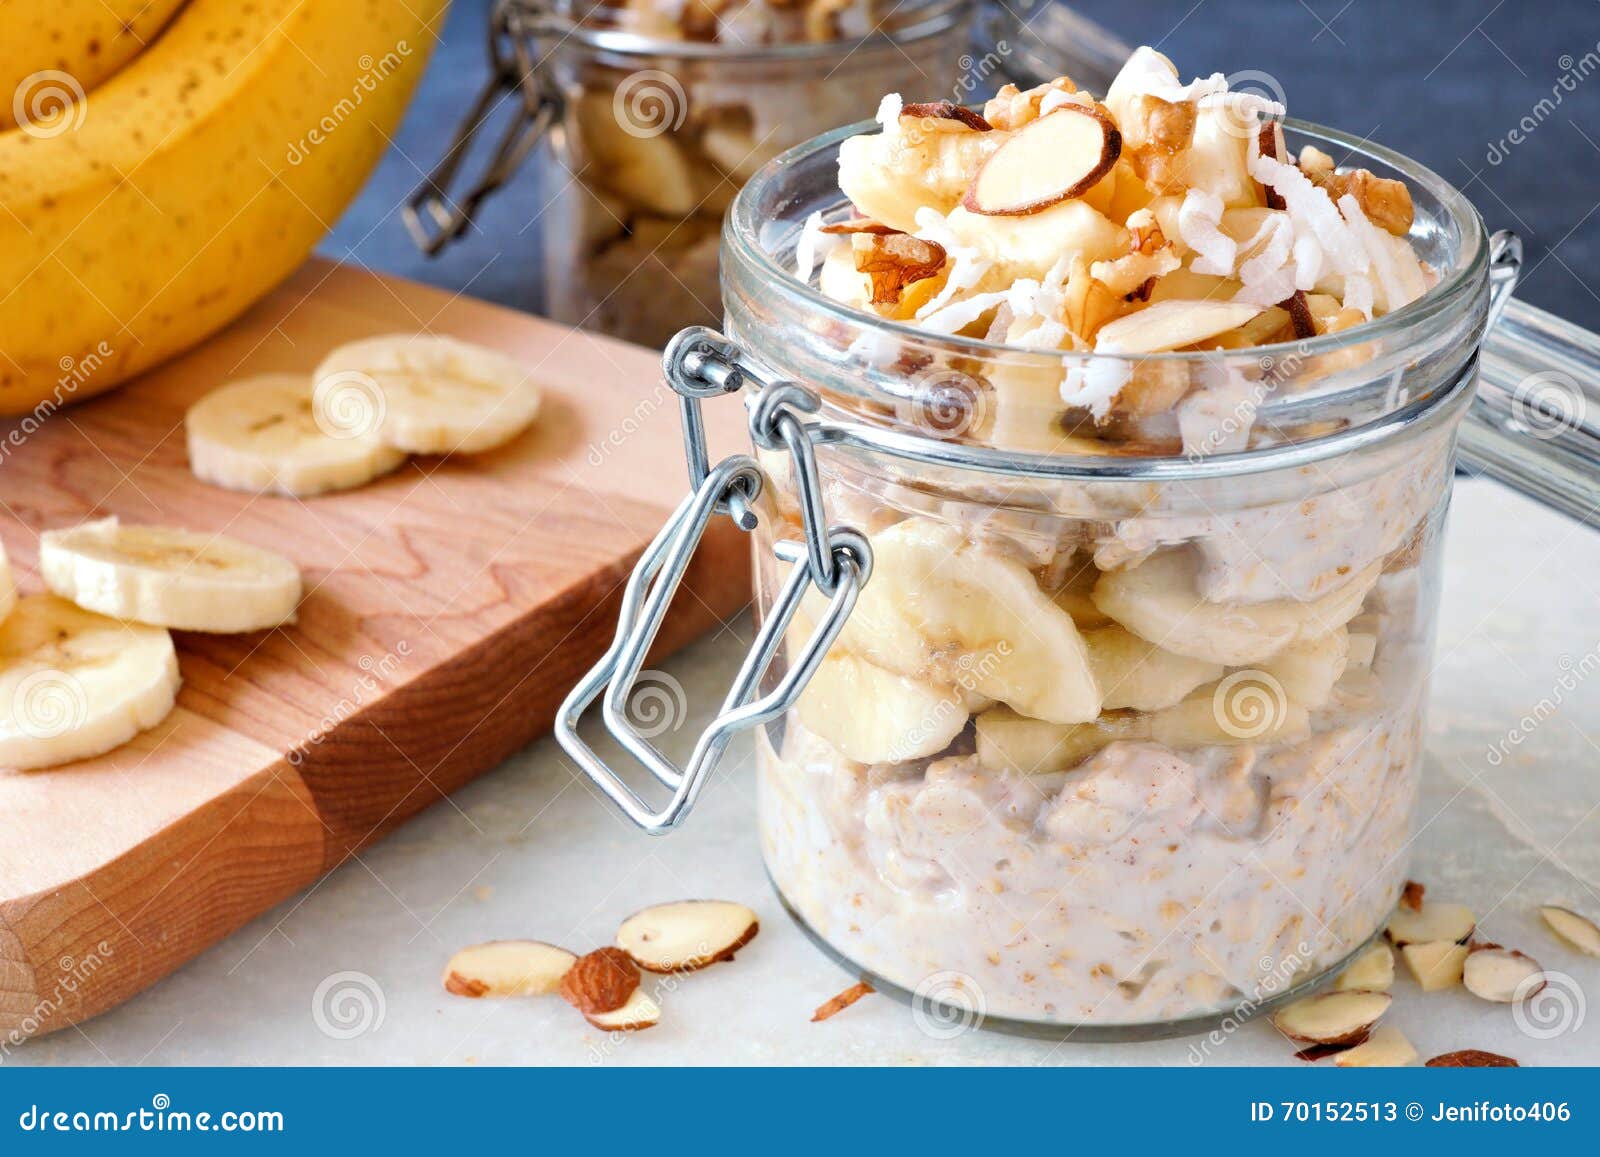 overnight oats with bananas and nuts in glass canning jars